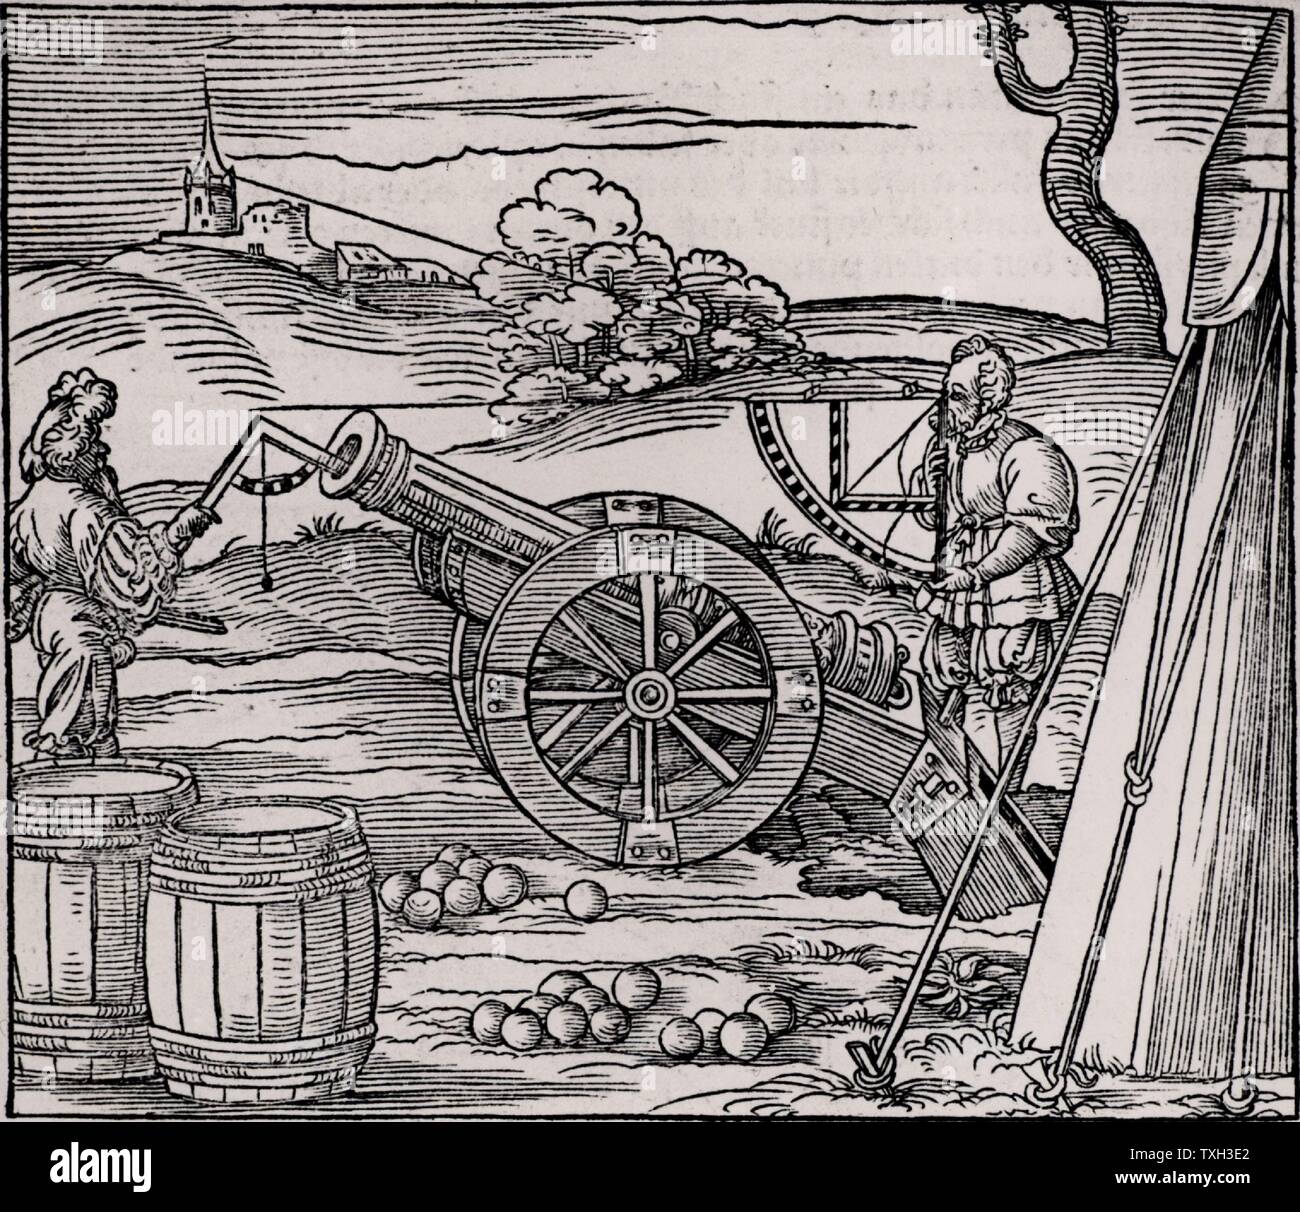 Ballistics.  Gunners calculating the elevation of a piece of artillery using a clinometer and a quadrant marked with shadow scales.  From 'Architechtur .. Mathematischen .. Kunst'  by Gaultherius Rivius (Nuremberg, 1547).  Woodcut. Stock Photo